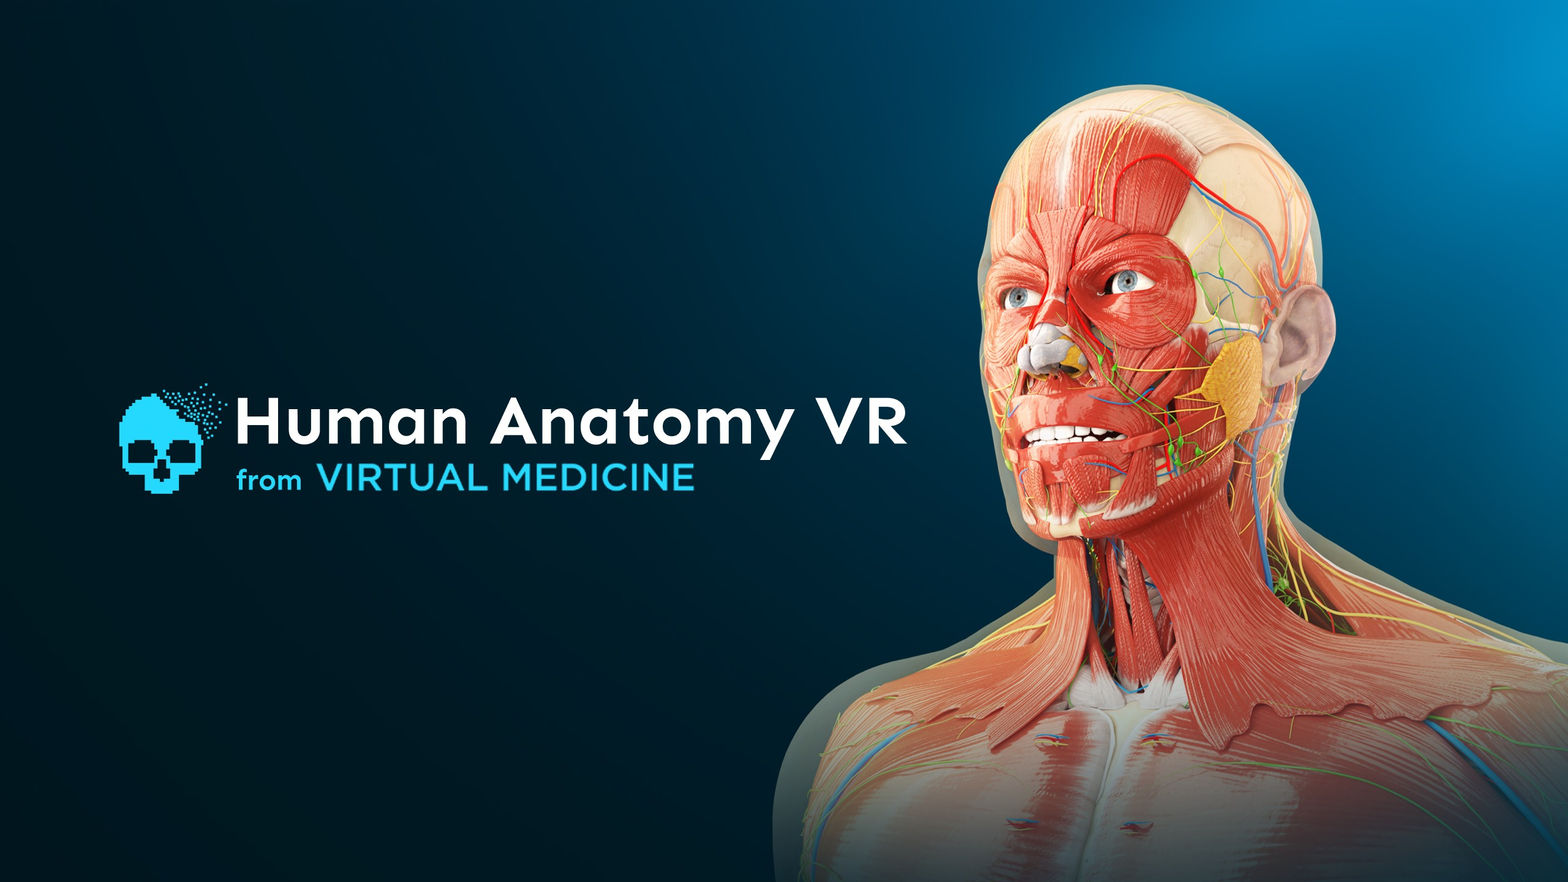 Human Anatomy VR for Institutions